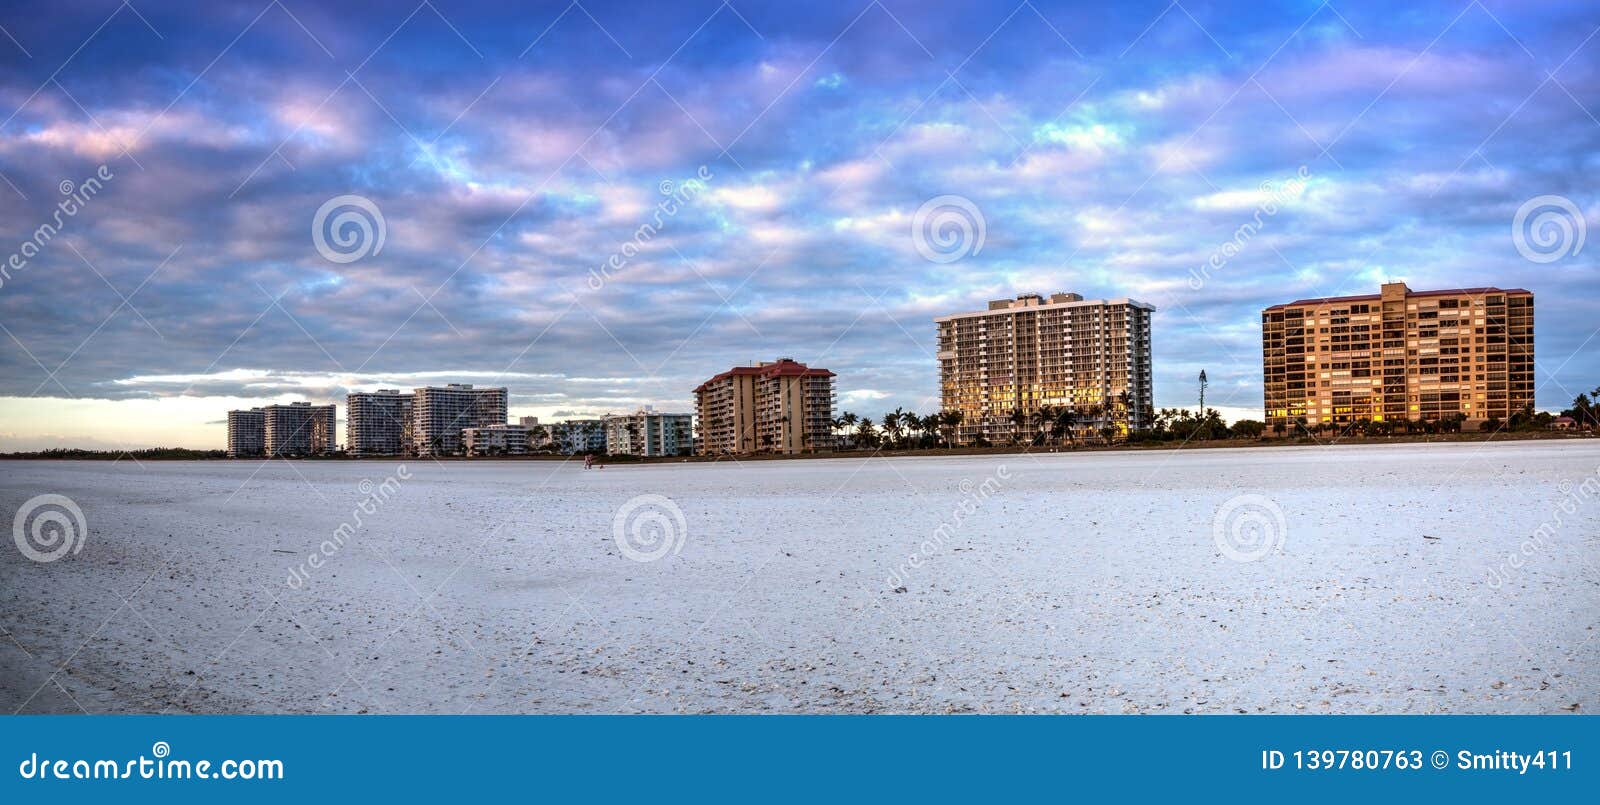 highrises along tigertail beach at night on marco island